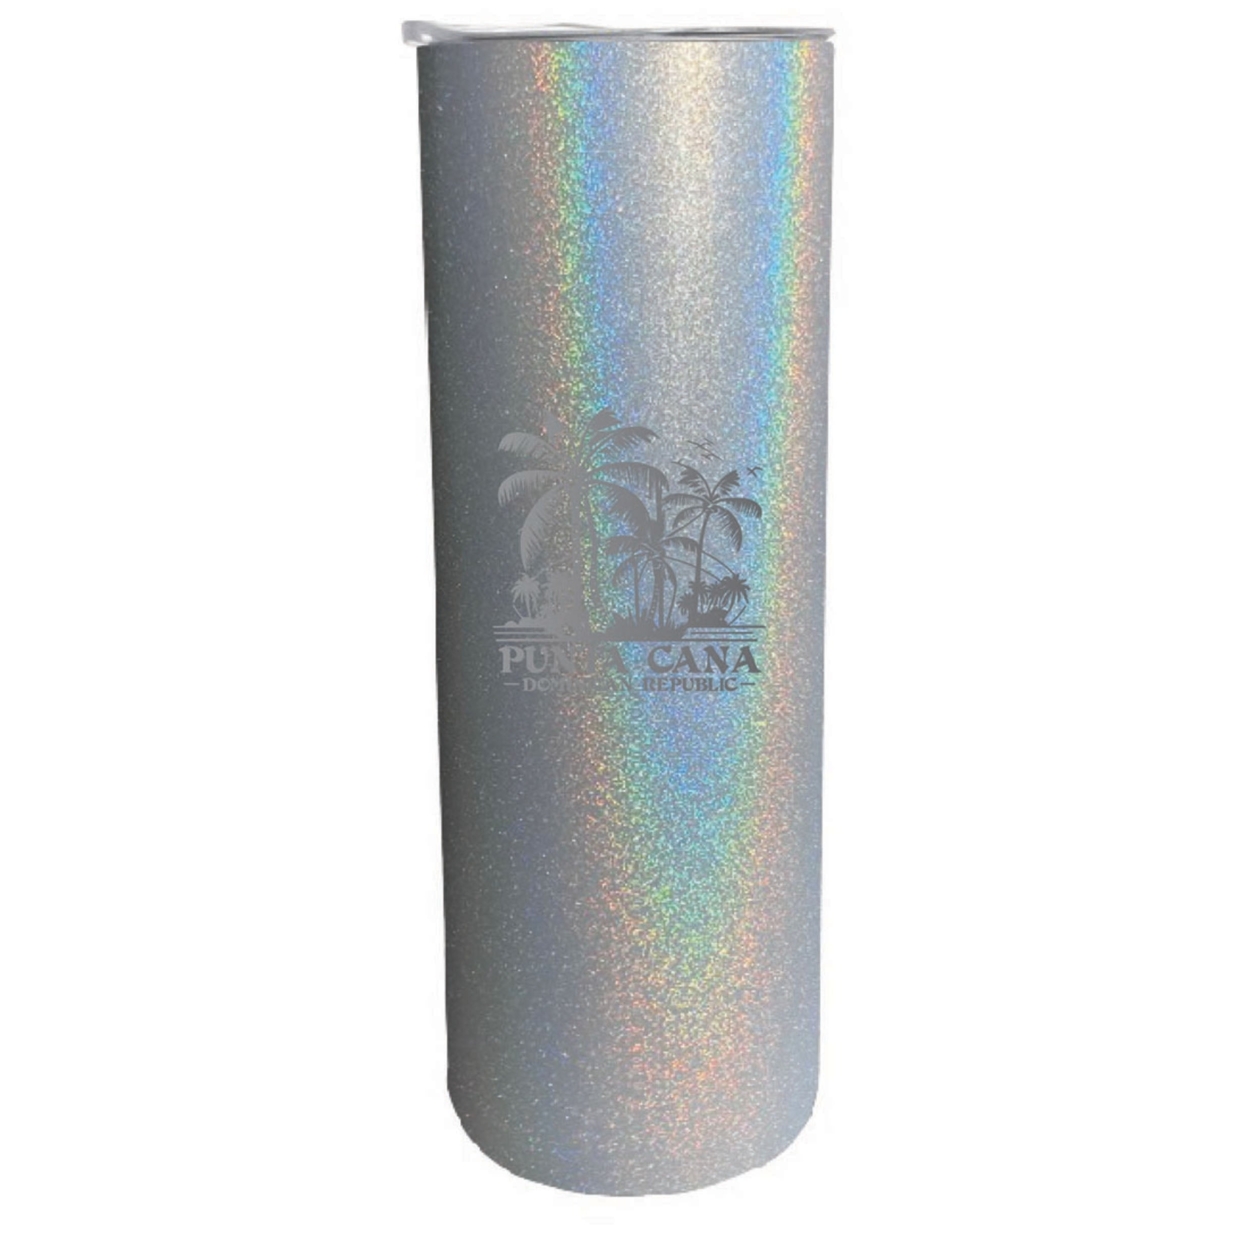 Punta Cana Dominican Republic Souvenir 20 Oz Insulated Stainless Steel Skinny Tumbler Etched - Rainbow Glitter Gray, PALMS